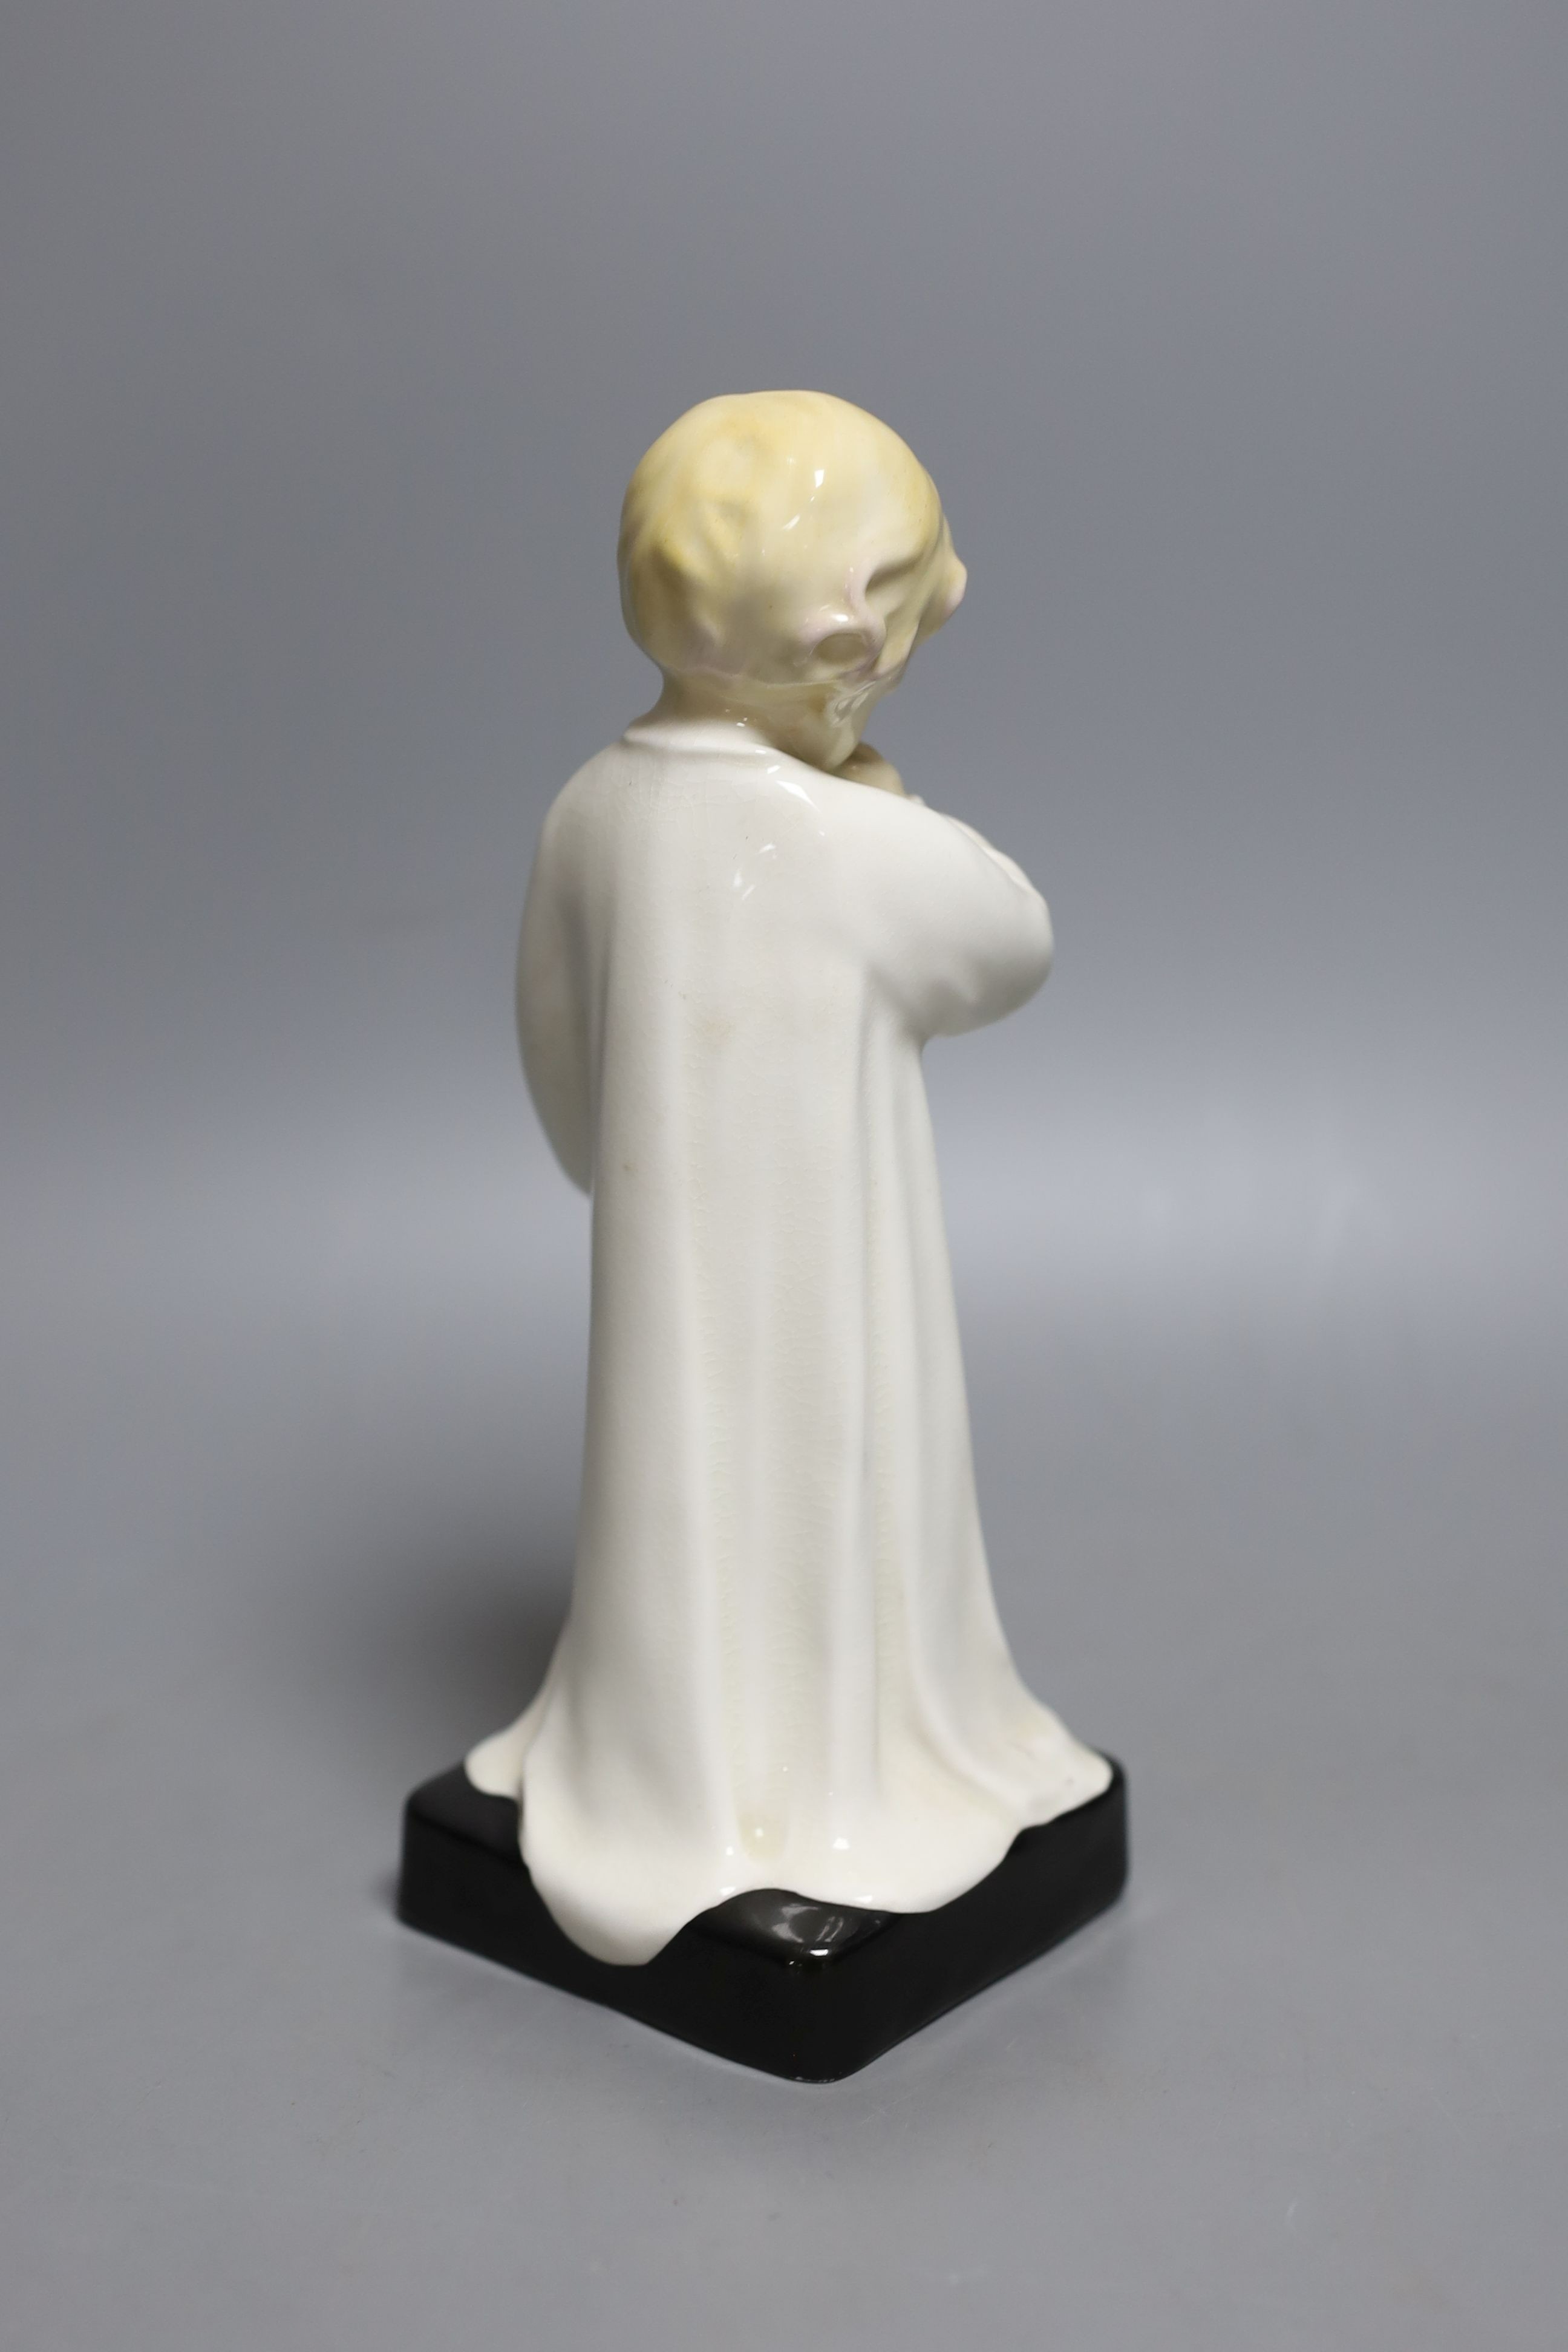 A Roual Doulton figure, Darling HN1319 - 21cm tall - Image 2 of 3